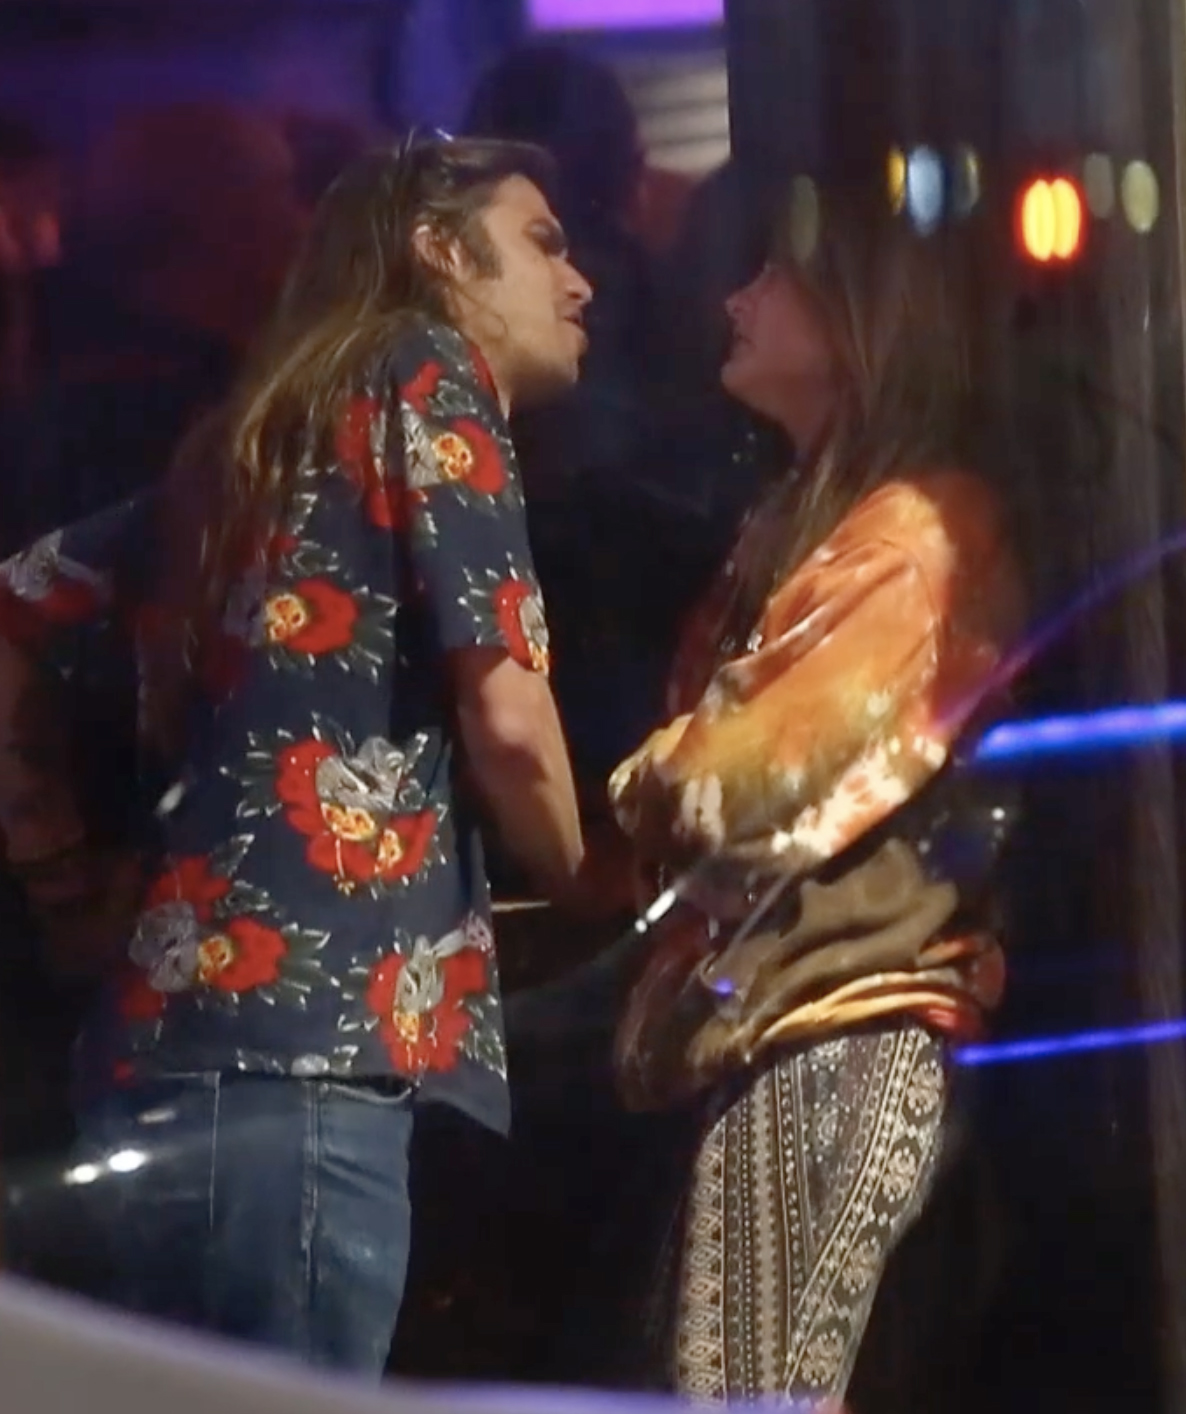 *PREMIUM EXCLUSIVE* Paris Jackson and boyfriend Gabriel Glenn have a furious bust-up during a wild alcohol-fuelled trip to New Orleans, while the controversy rages over Leaving Neverland, the HBO documentary about her late father Michael Jackson.  Still just 20, Paris was spotted under-age drinking, smoking and getting into some heated exchanges with musician Glenn.
03 Mar 2019,Image: 419209695, License: Rights-managed, Restrictions: World Rights, Model Release: no, Credit line: MEGA / The Mega Agency / Profimedia